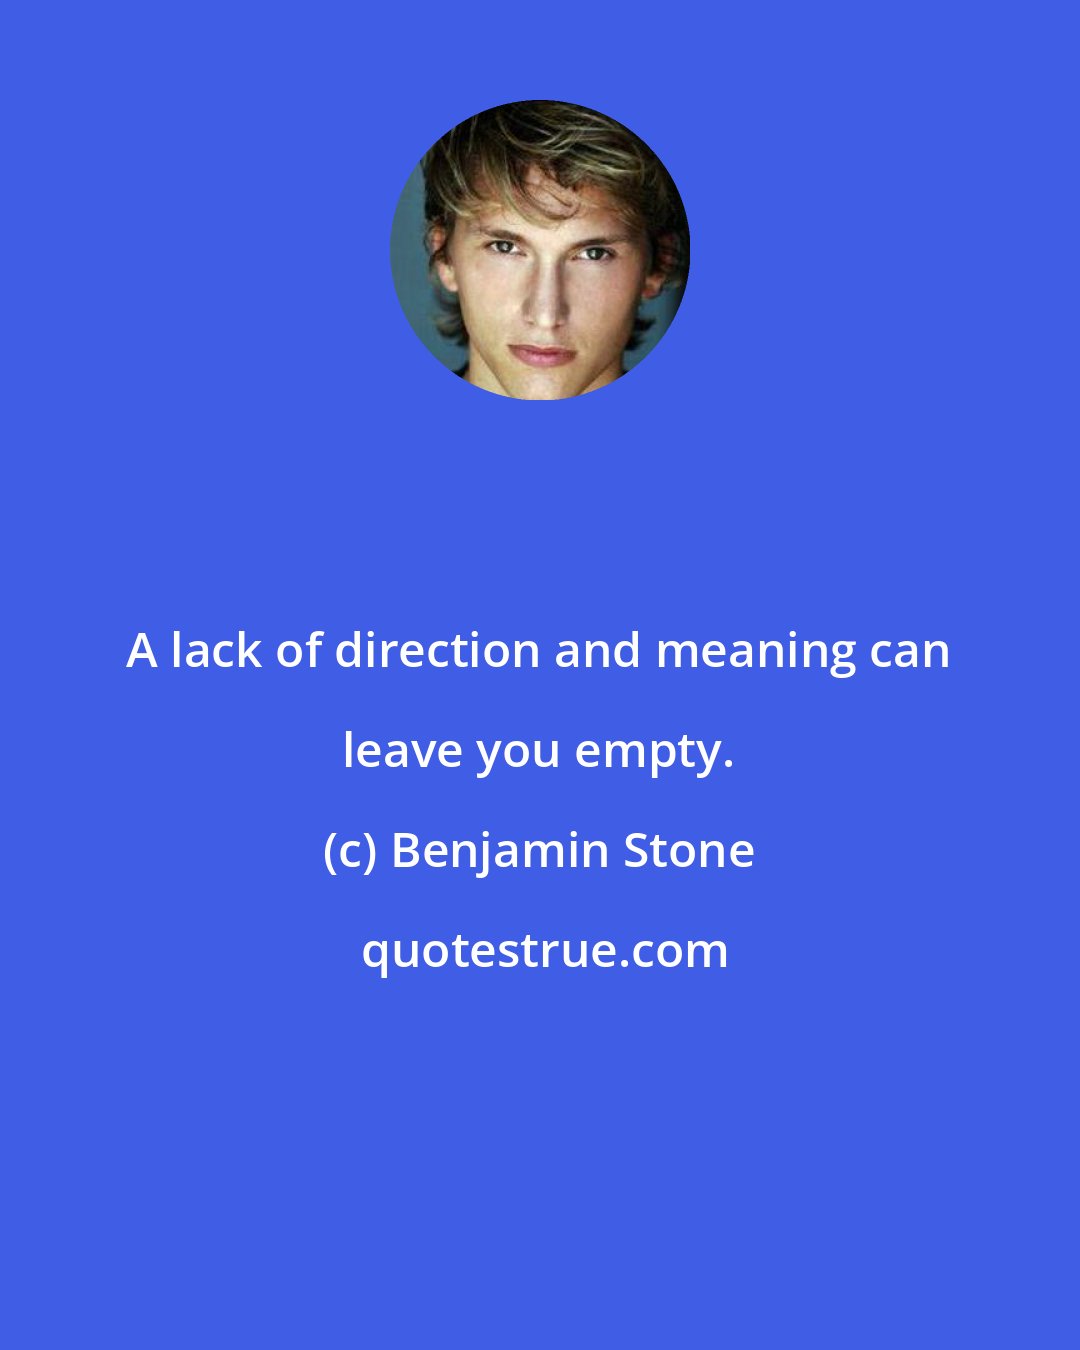 Benjamin Stone: A lack of direction and meaning can leave you empty.